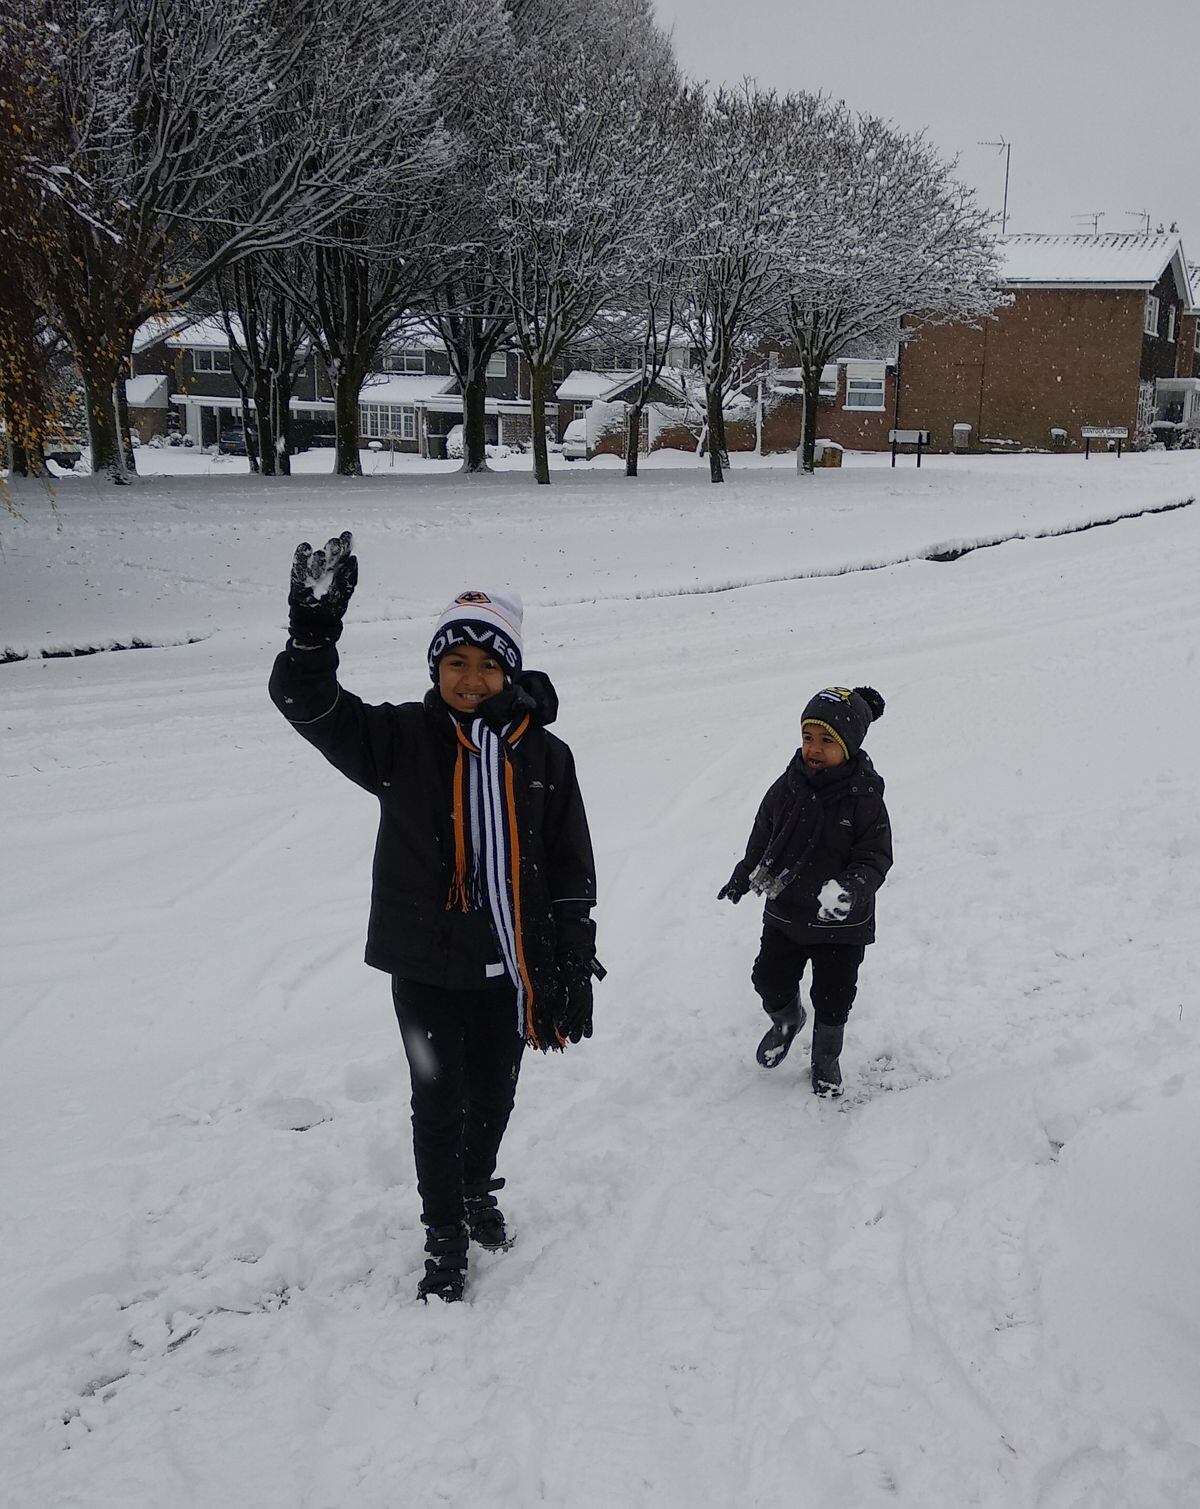 Harri and Dara Sidhu get out and enjoy the snow in Finchfield, Wolverhampton